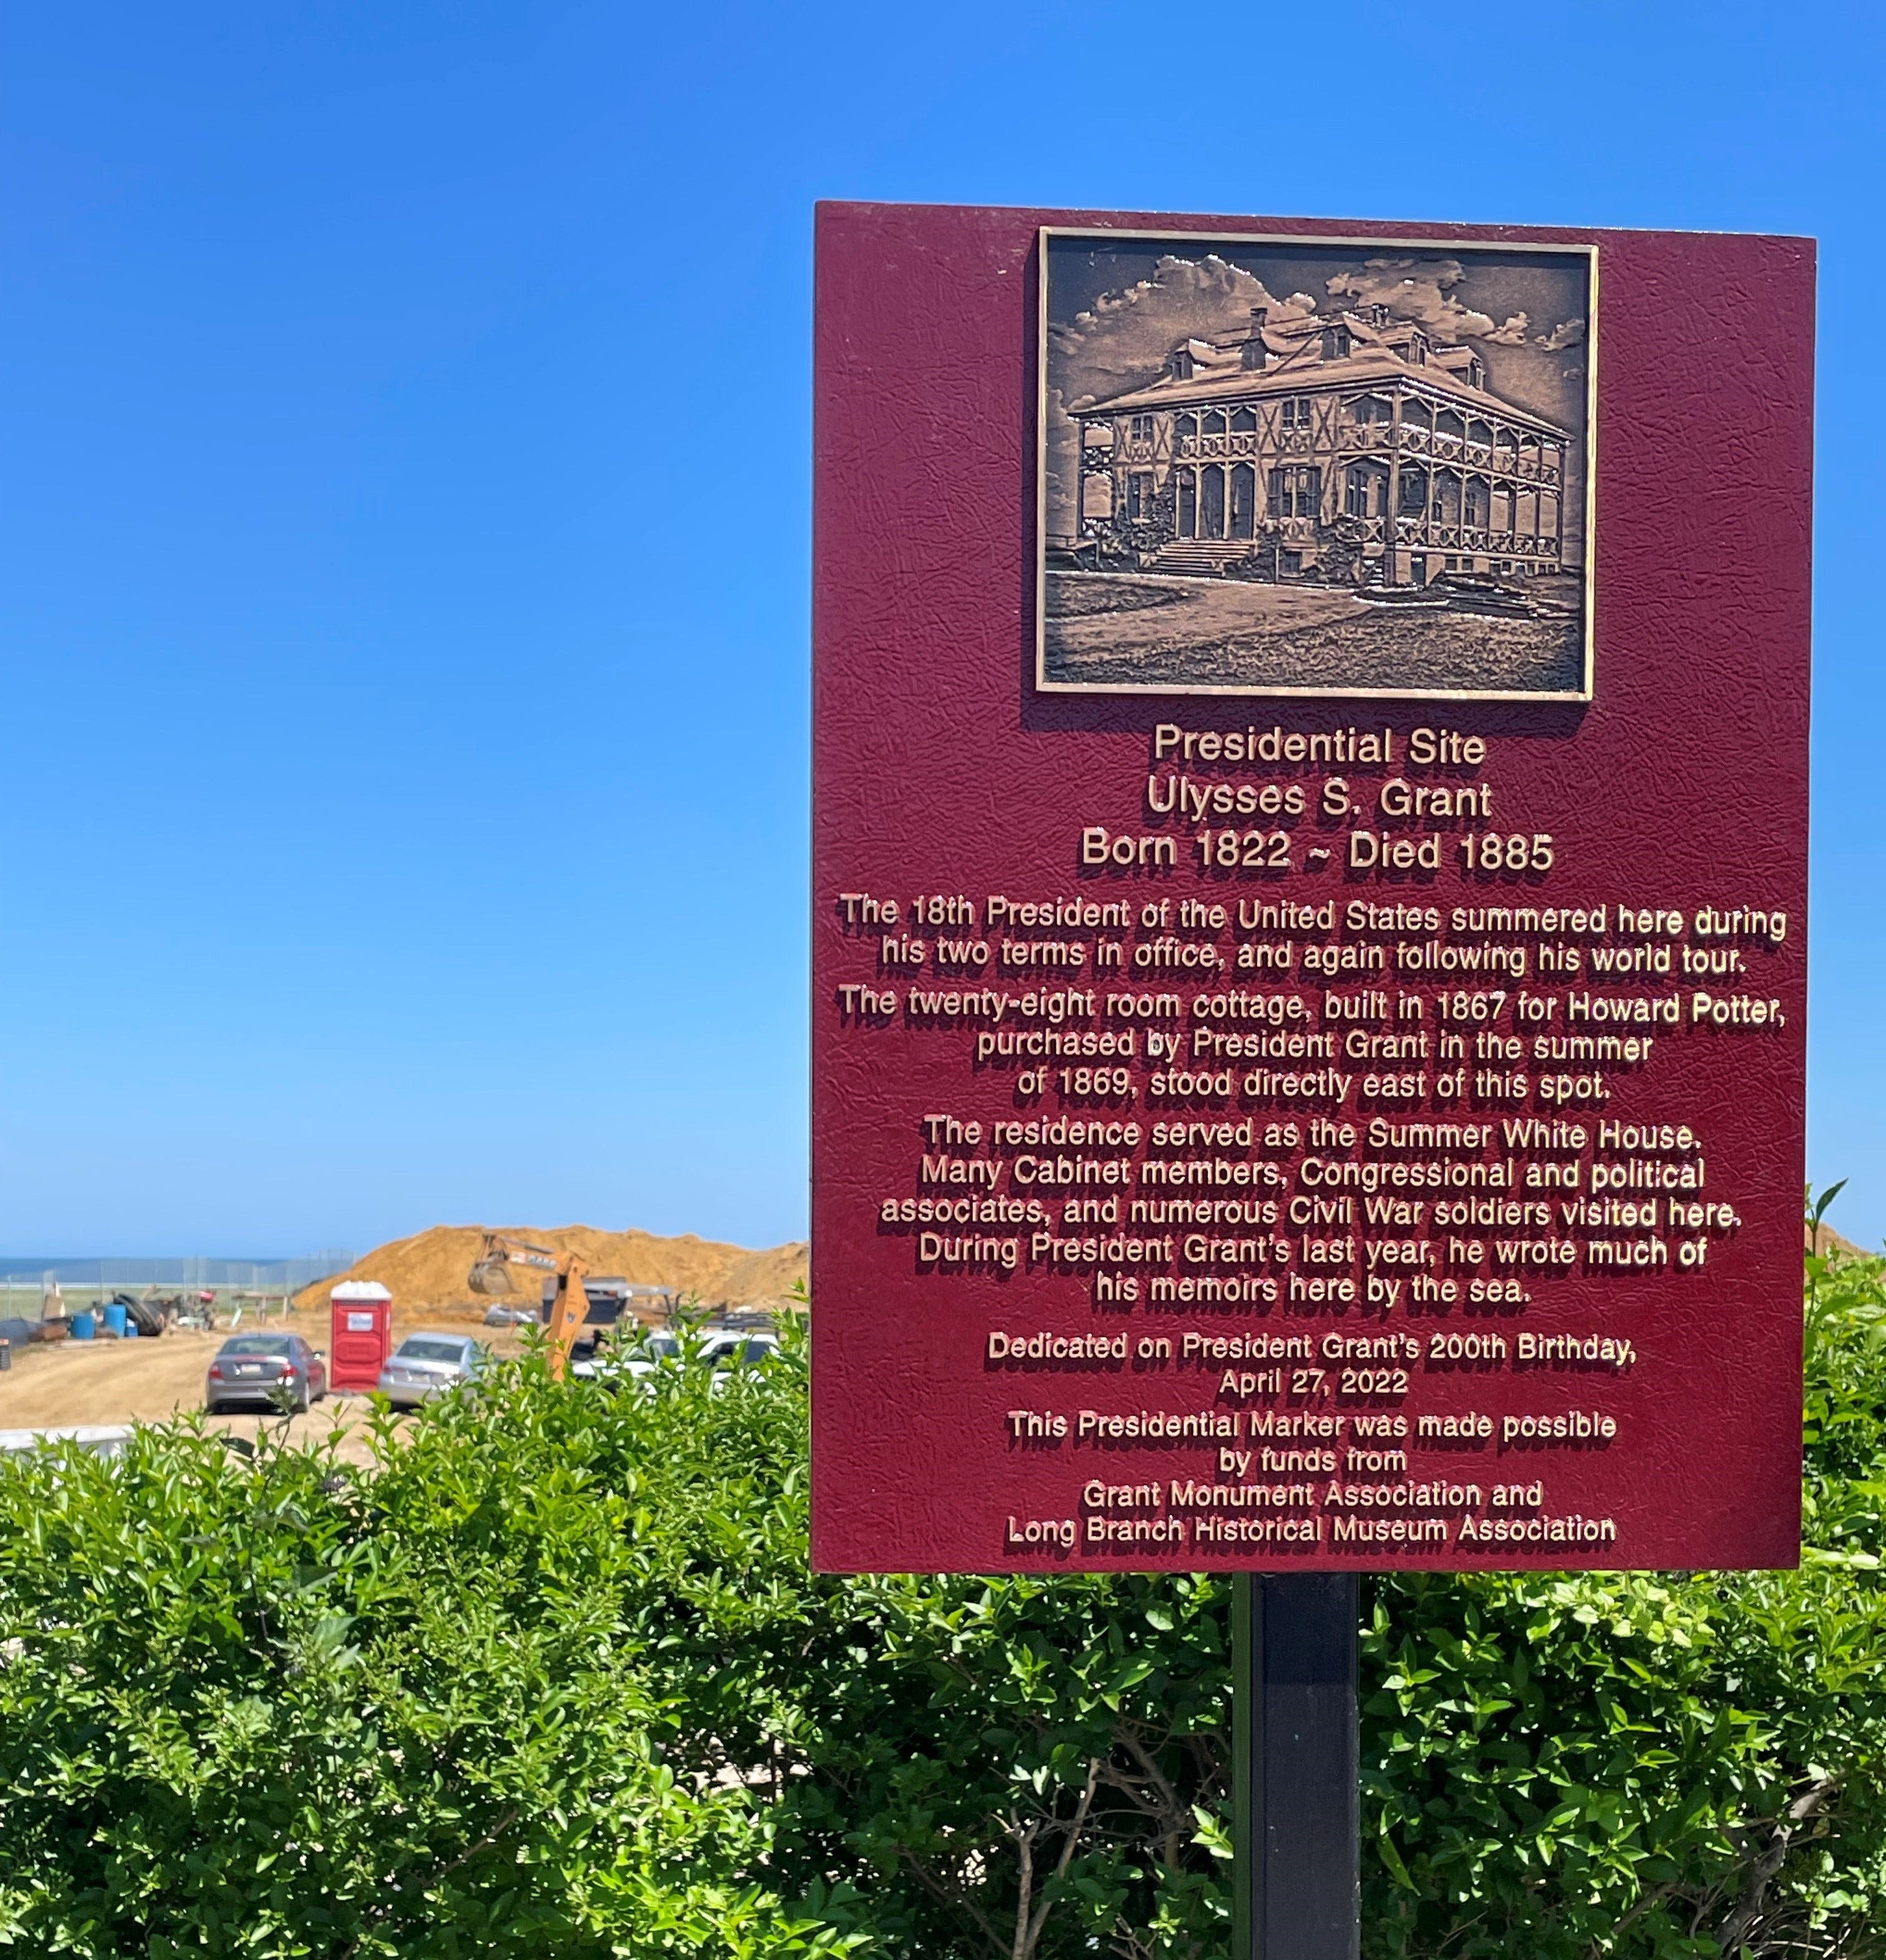 Long Branch beachfront homes under construction on U.S. Grant's old land